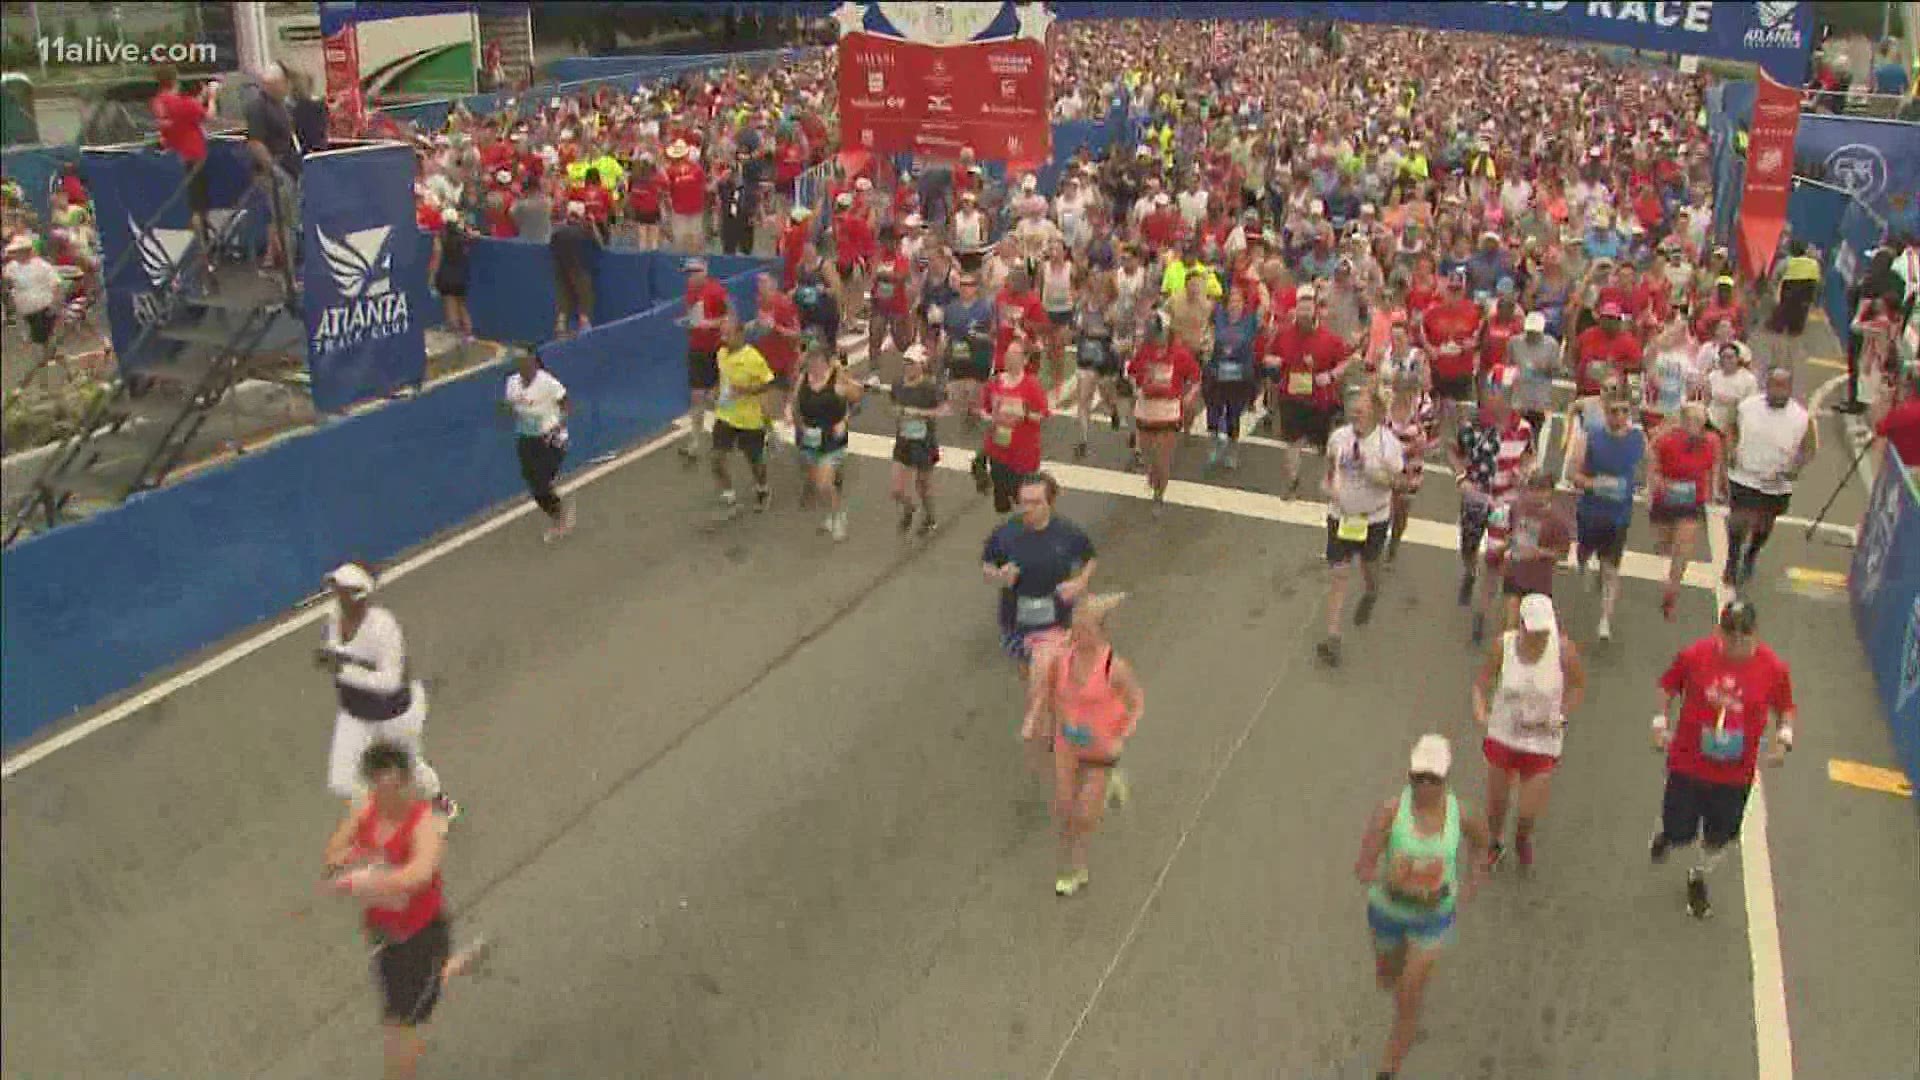 The 51st running of the AJC Peachtree Road Race will be a virtual running. This is a historic move for the world's largest 10K.